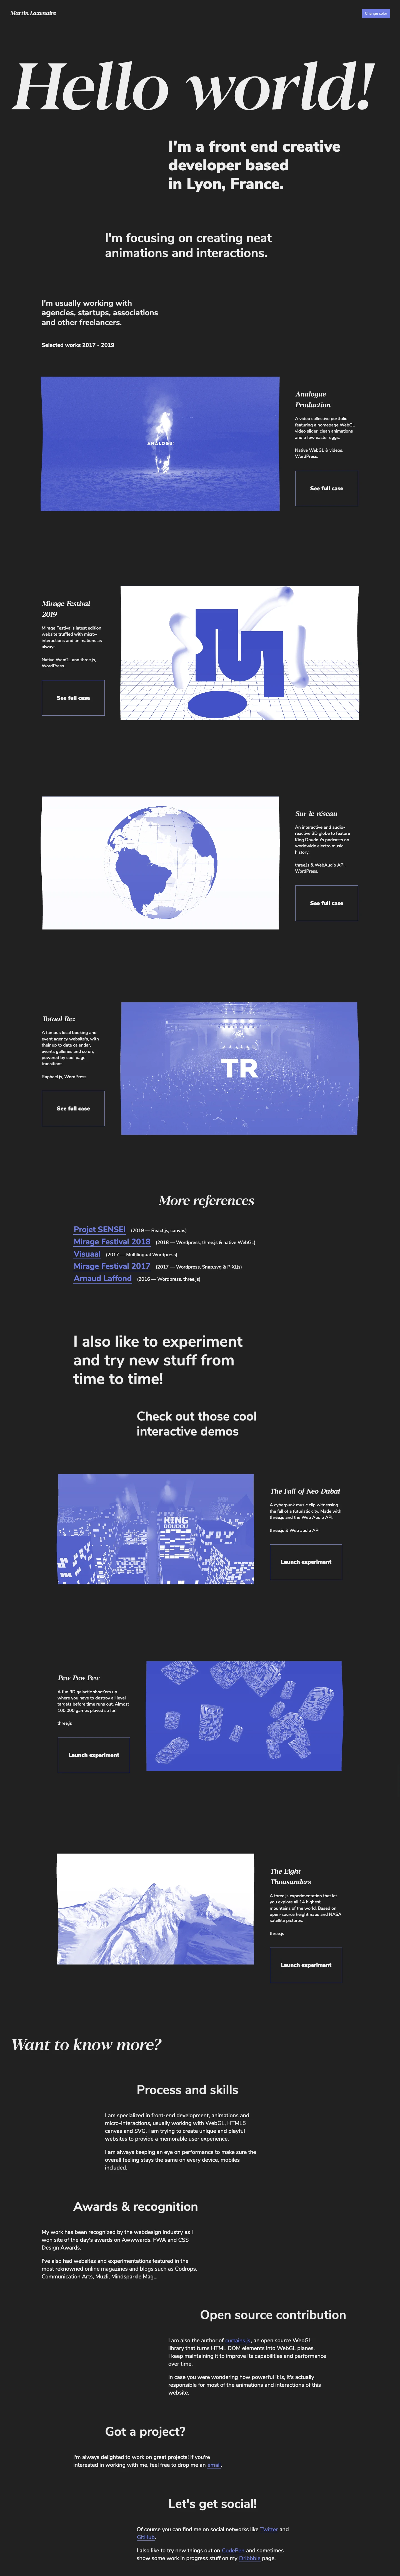 Martin Laxenaire Landing Page Example: Martin Laxenaire is a french creative freelance front end developer focusing on interactivity and user experience.